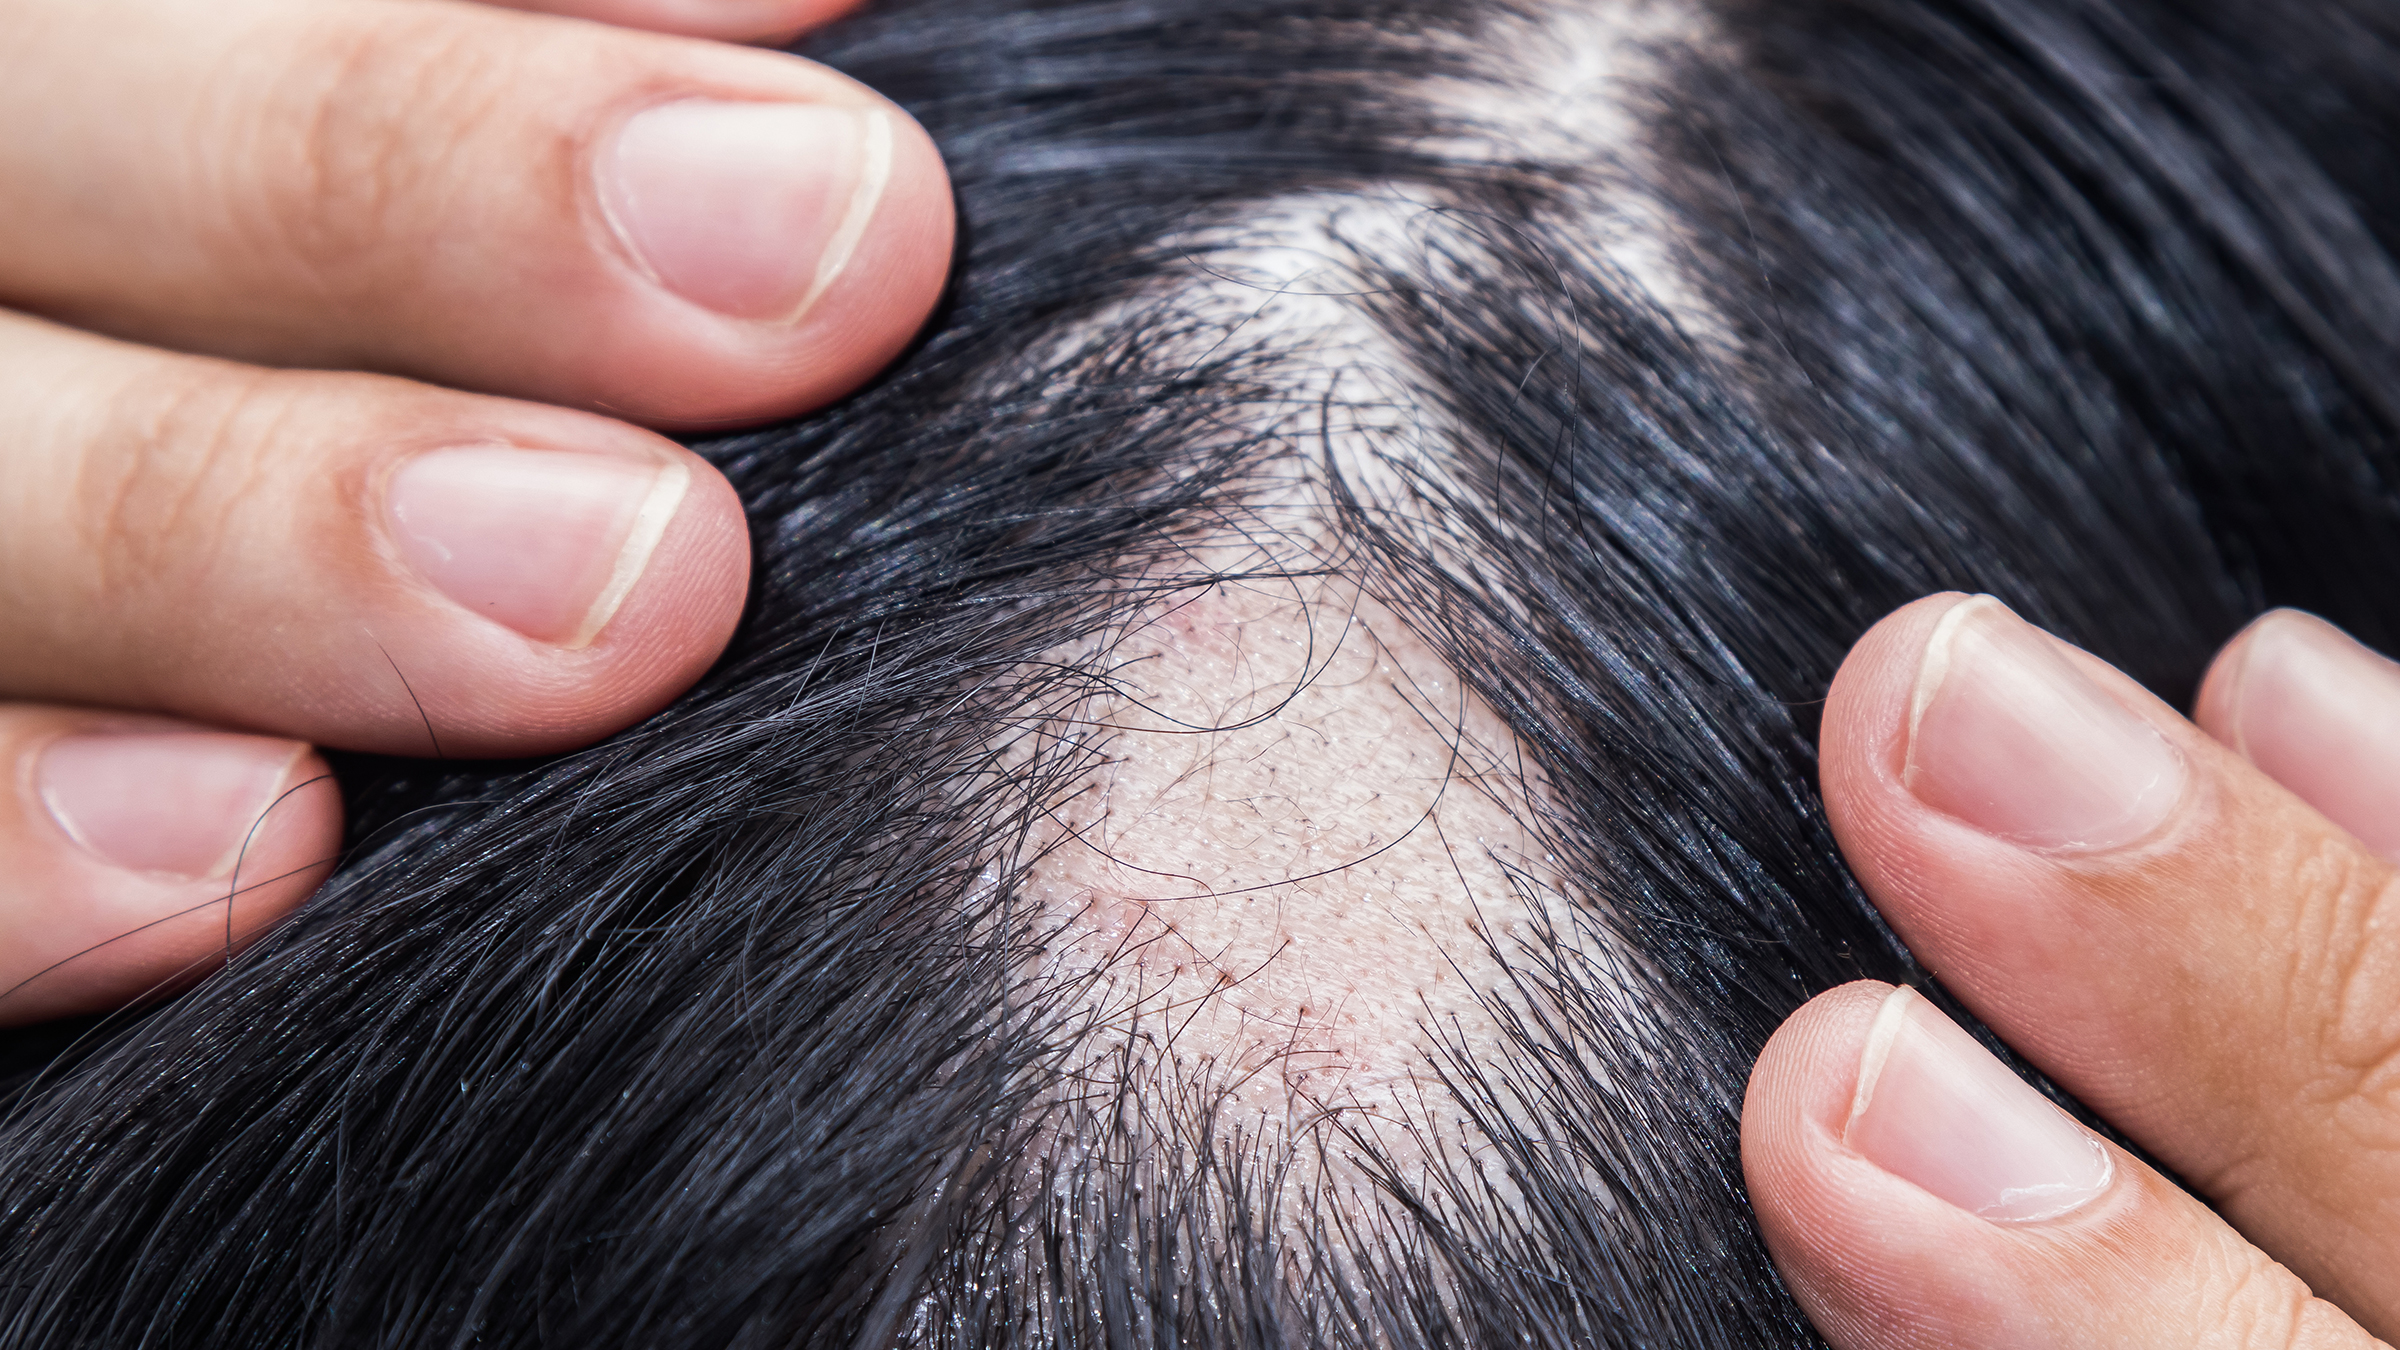 Scalp Conditions: Pictures, Causes, and Treatments